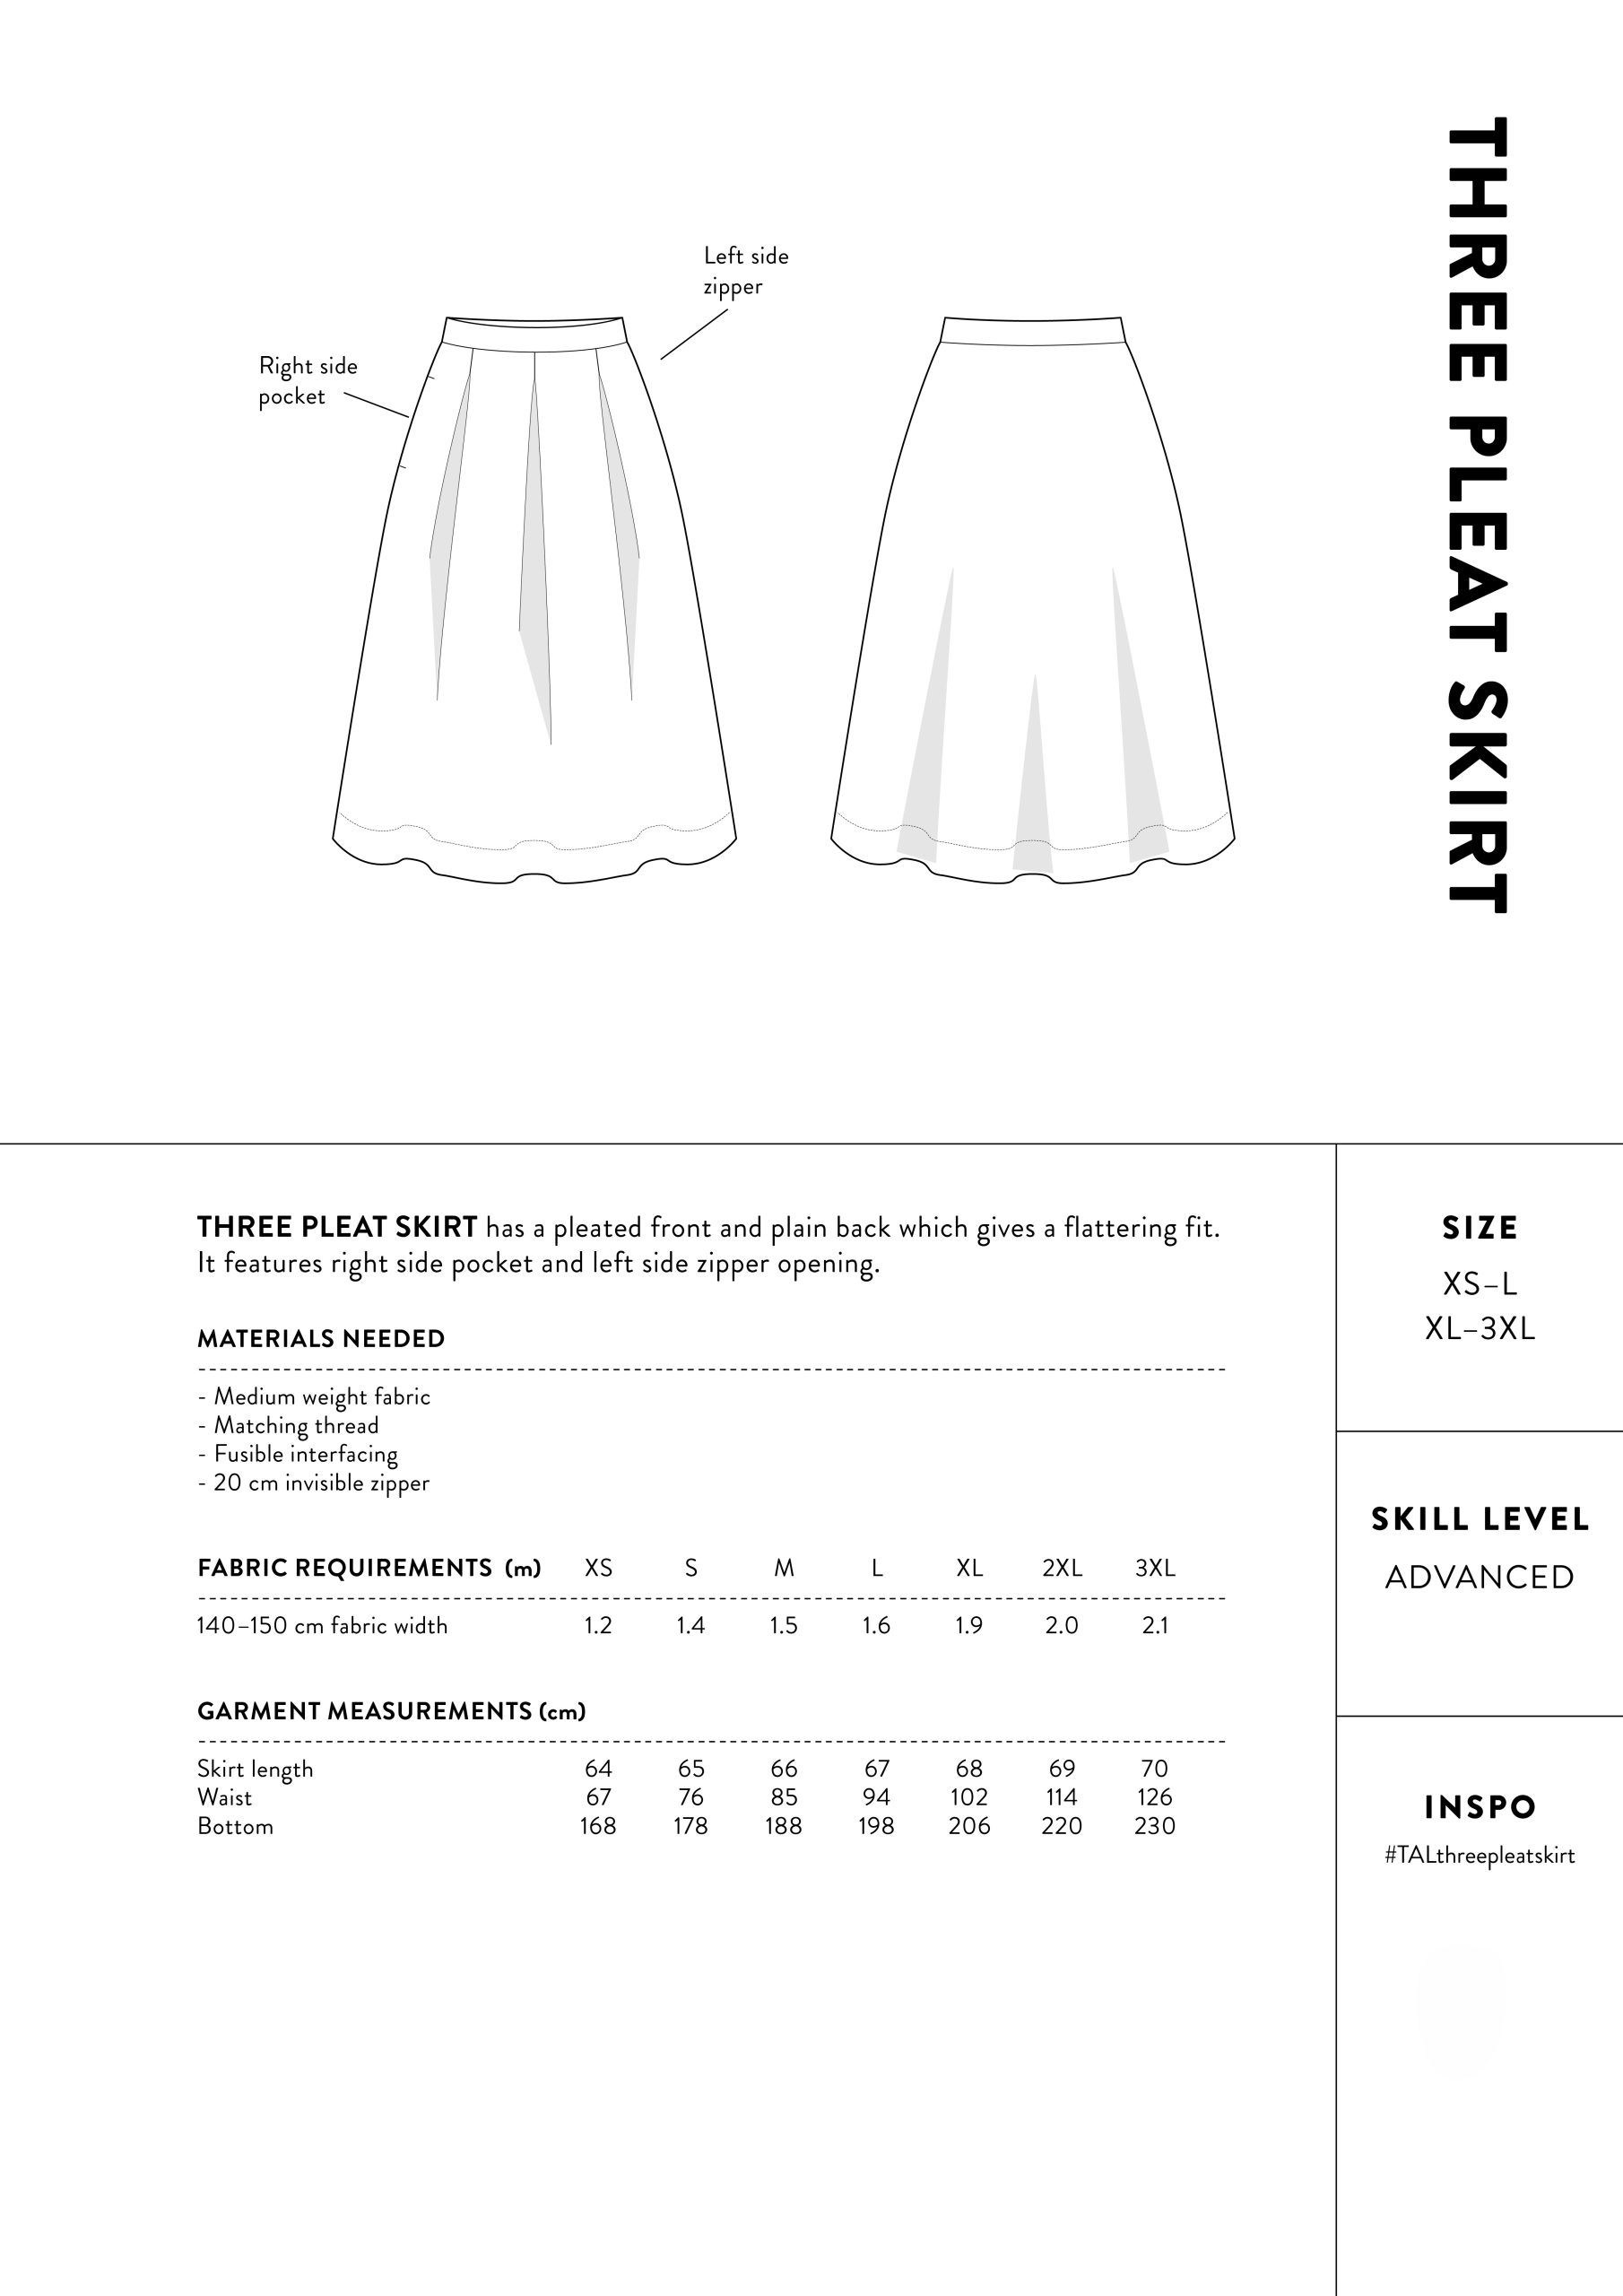 The Assembly Line Three Pleat Skirt